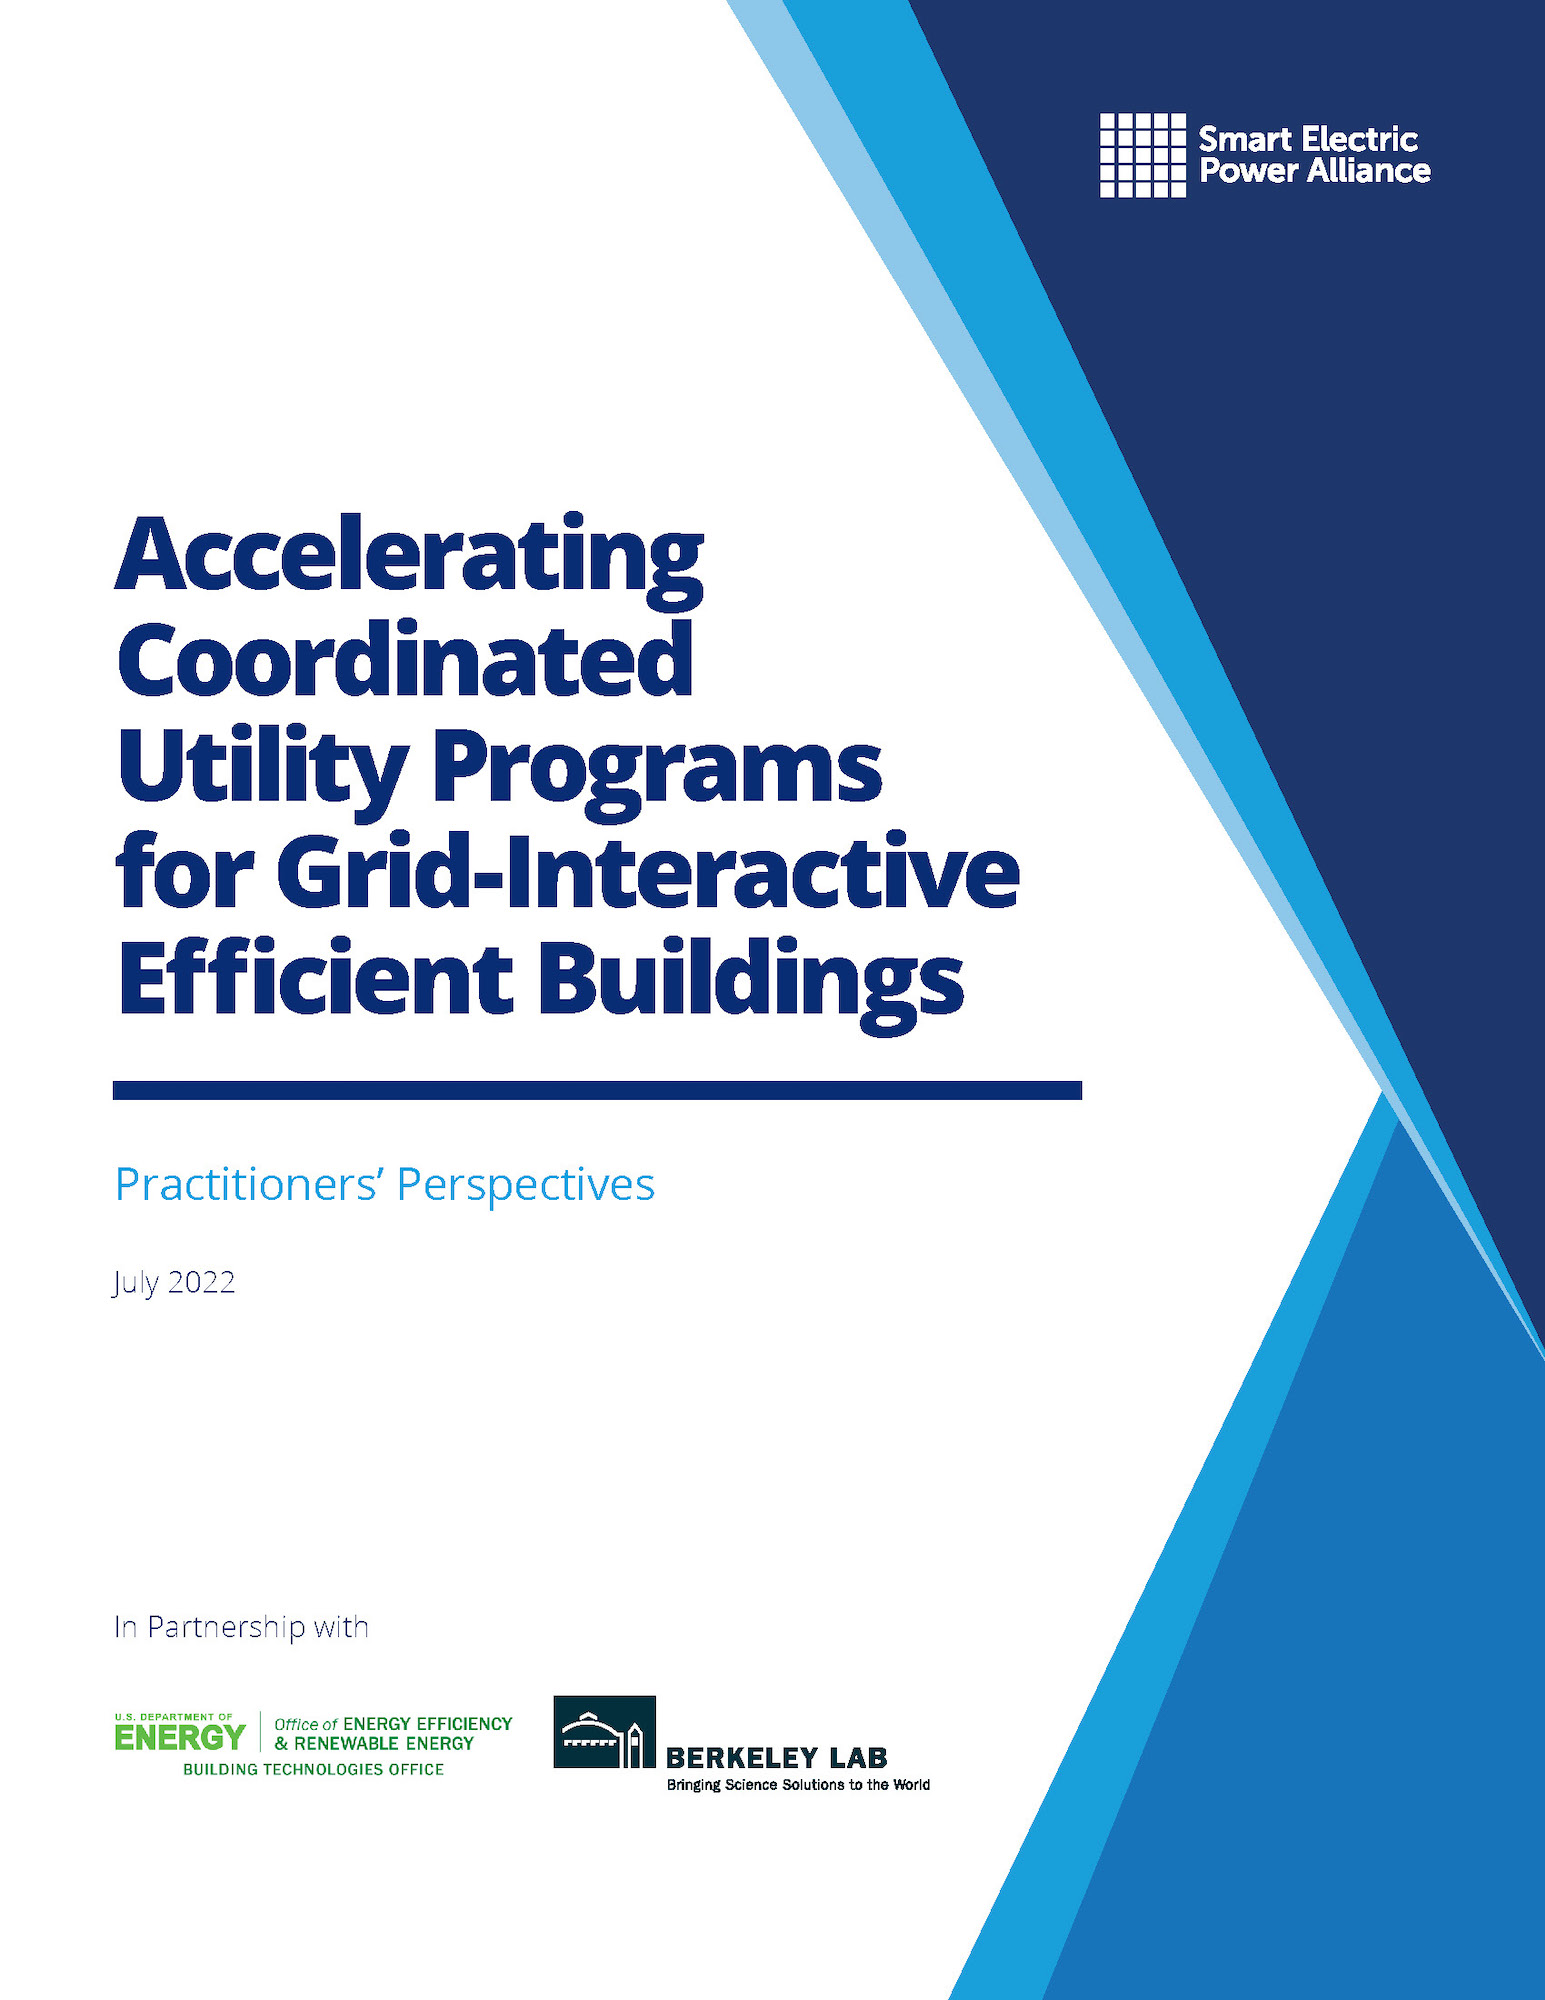 Accelerating Coordinated Utility Programs for Grid-Interactive Efficient Buildings: Practitioners’ Perspectives